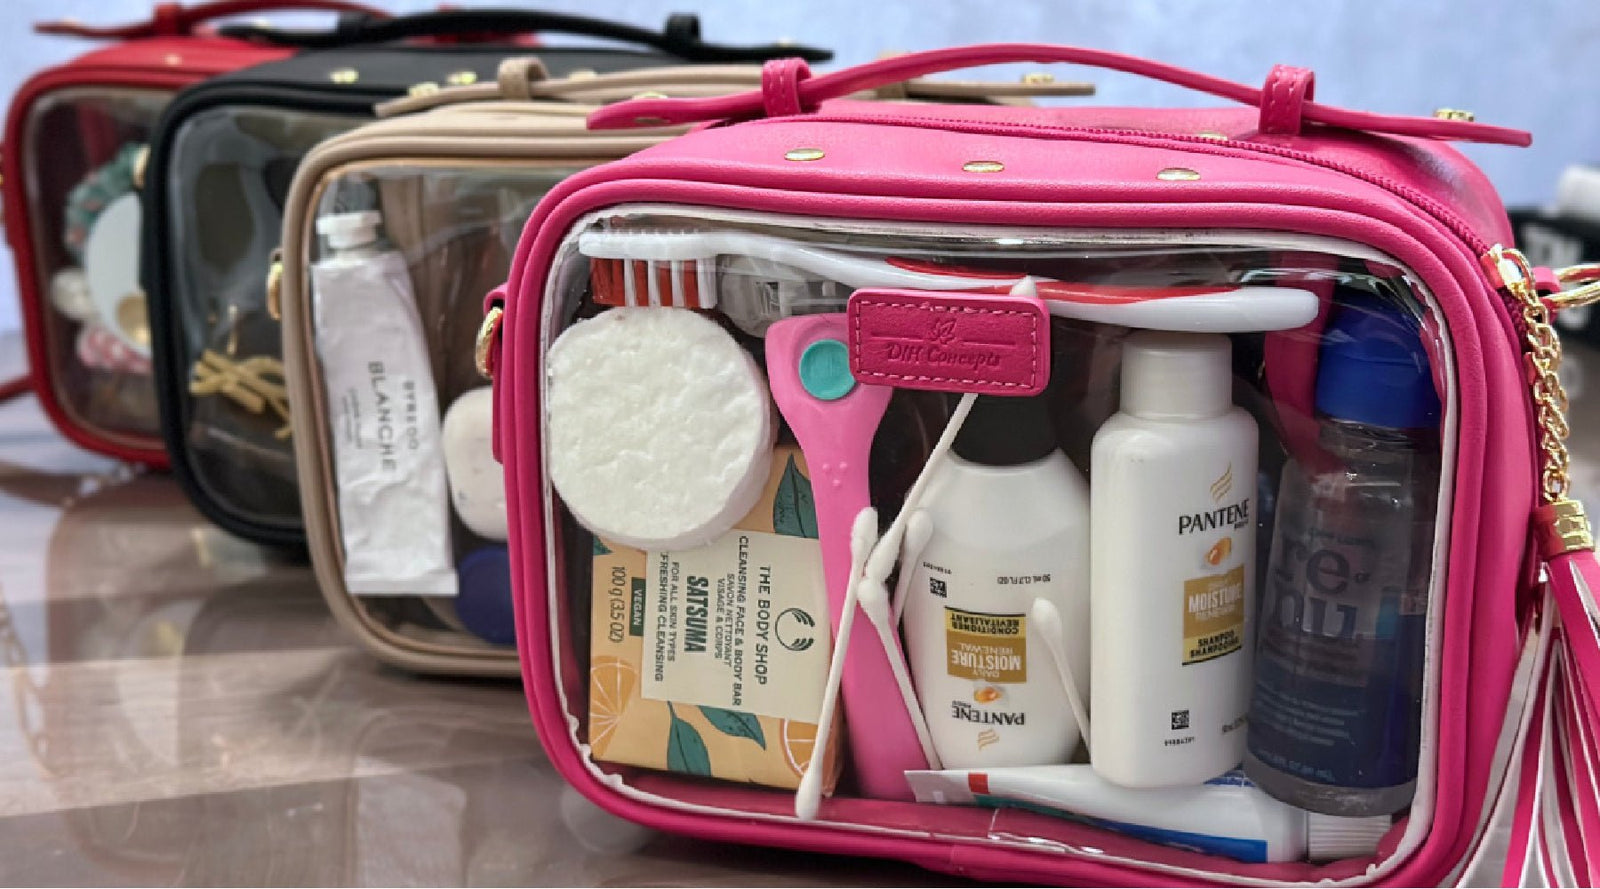 The Ultimate Guide to Choosing the Best Women's Toiletry Bag - DIH Concepts